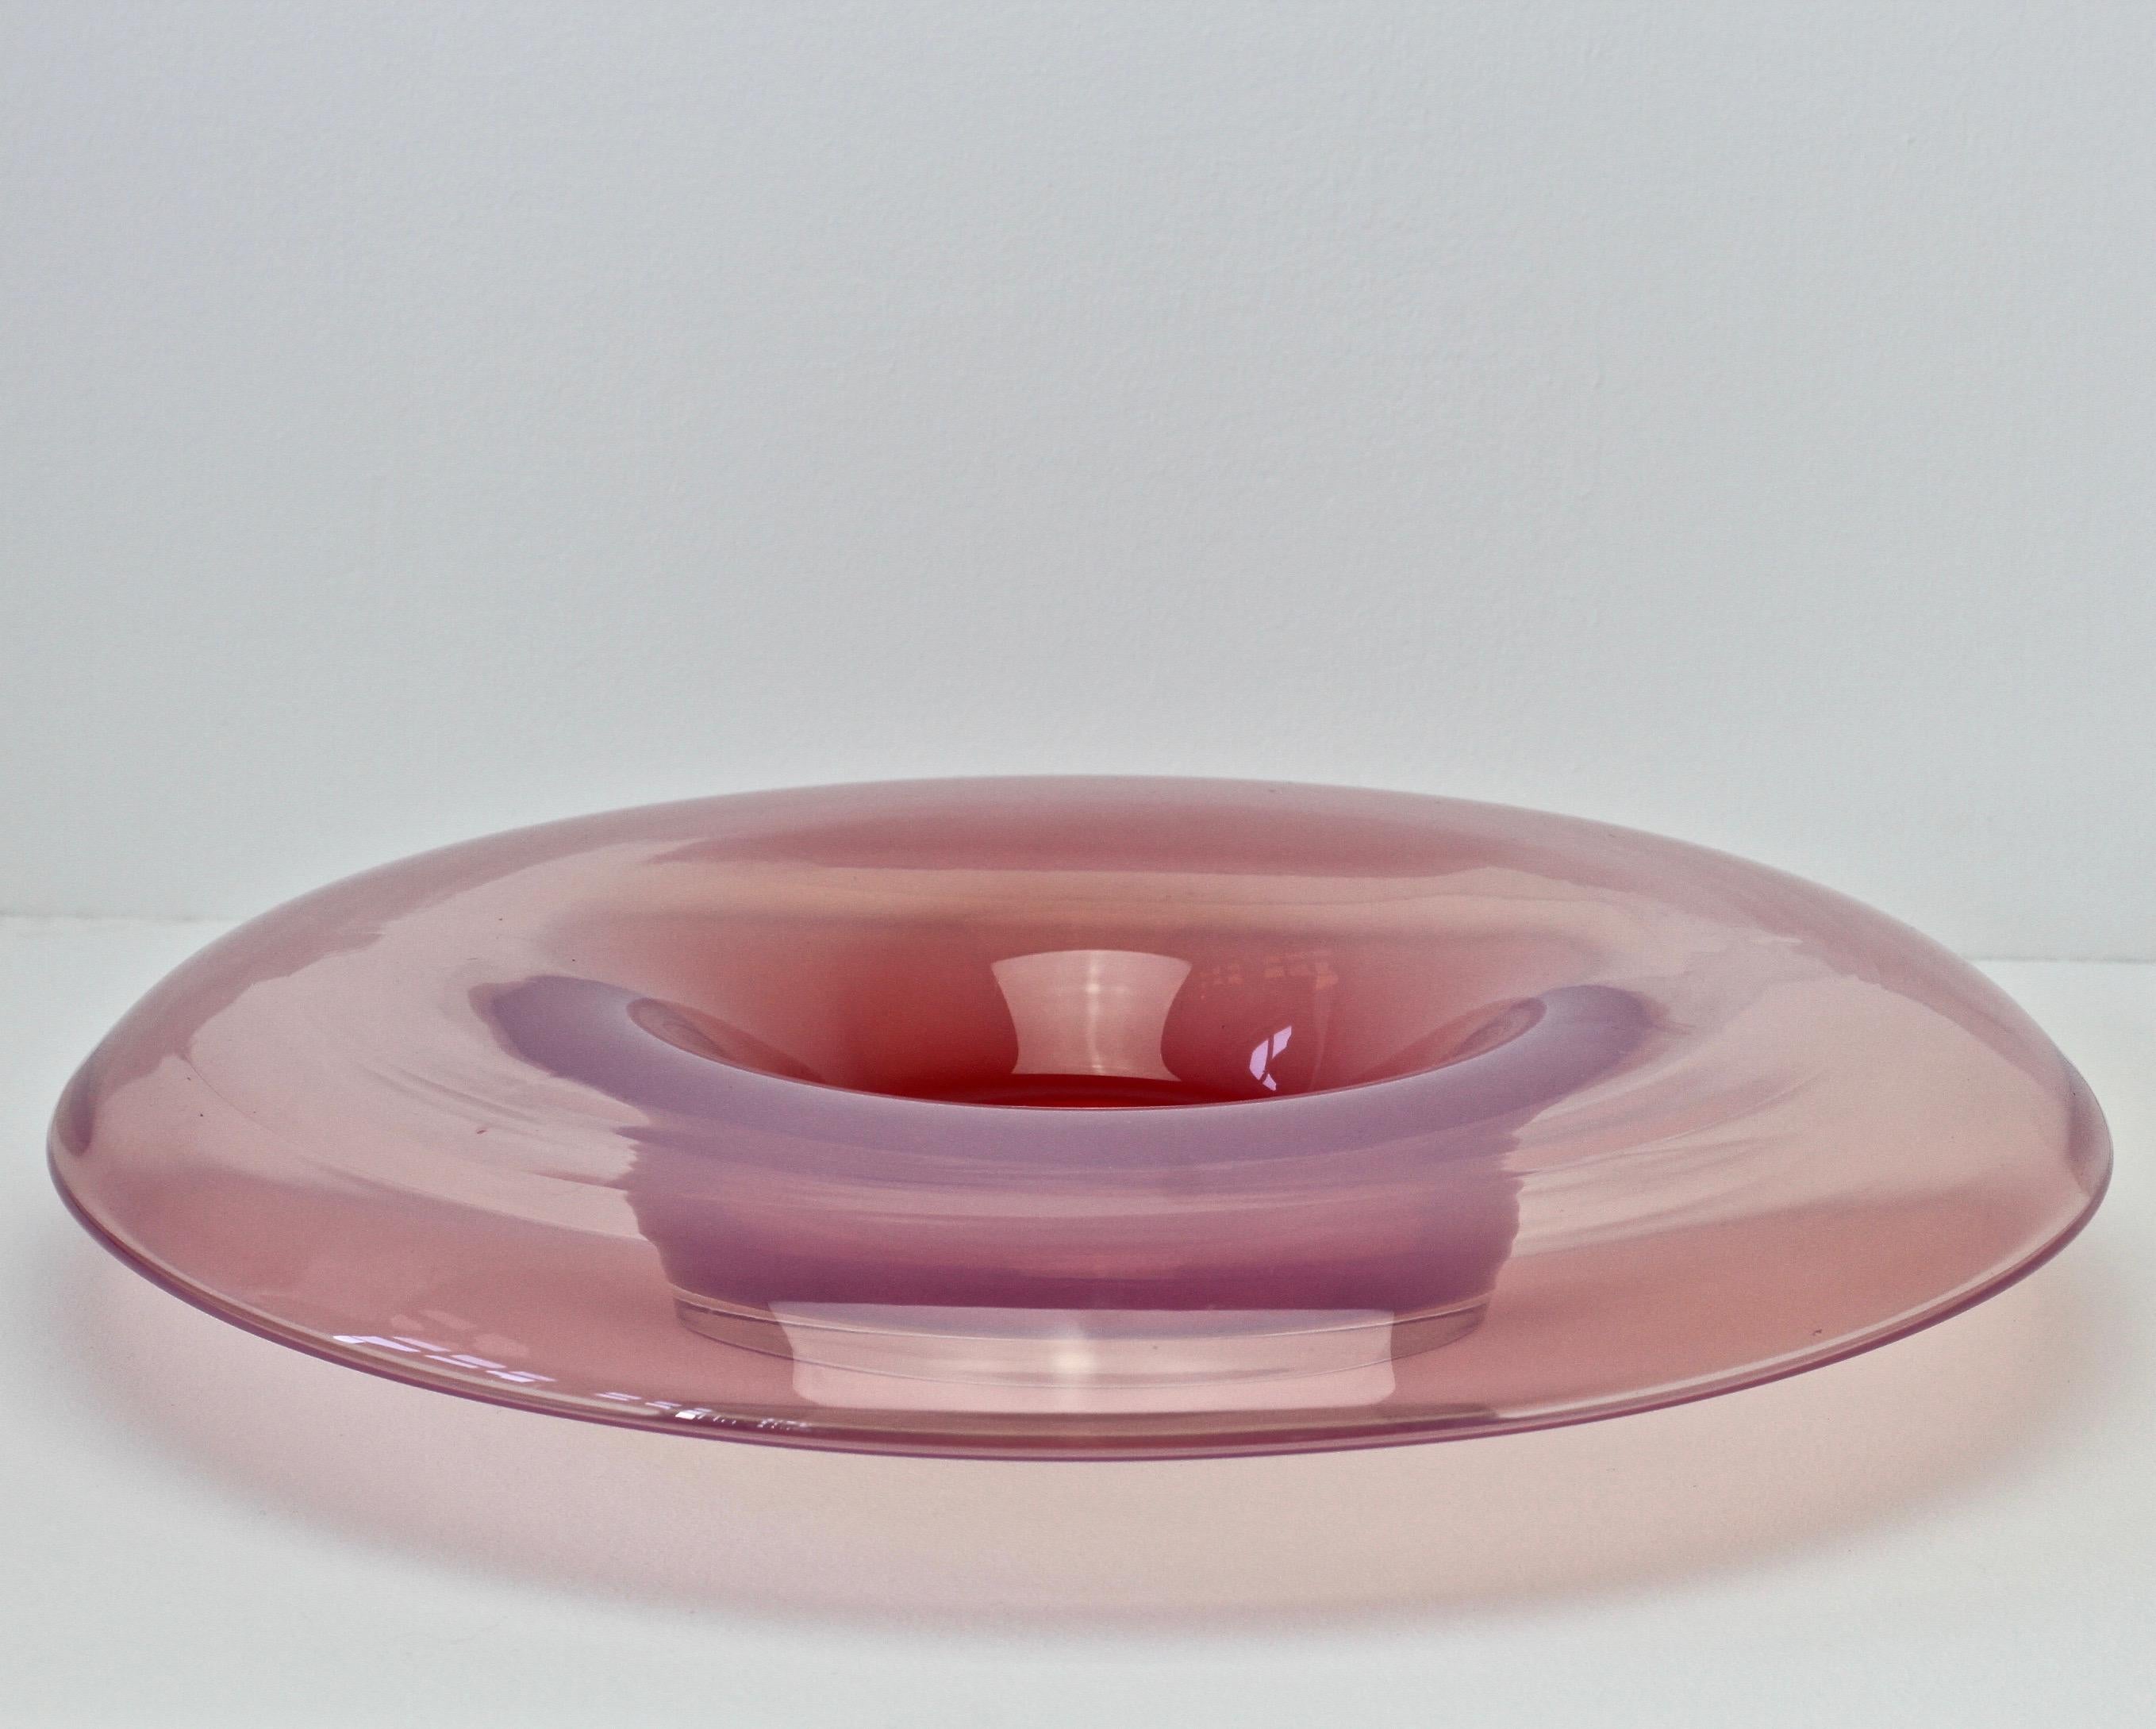 Italian Signed Cenedese Murano Glass Vibrantly Colored Pink 'Jellyfish' Serving Bowl